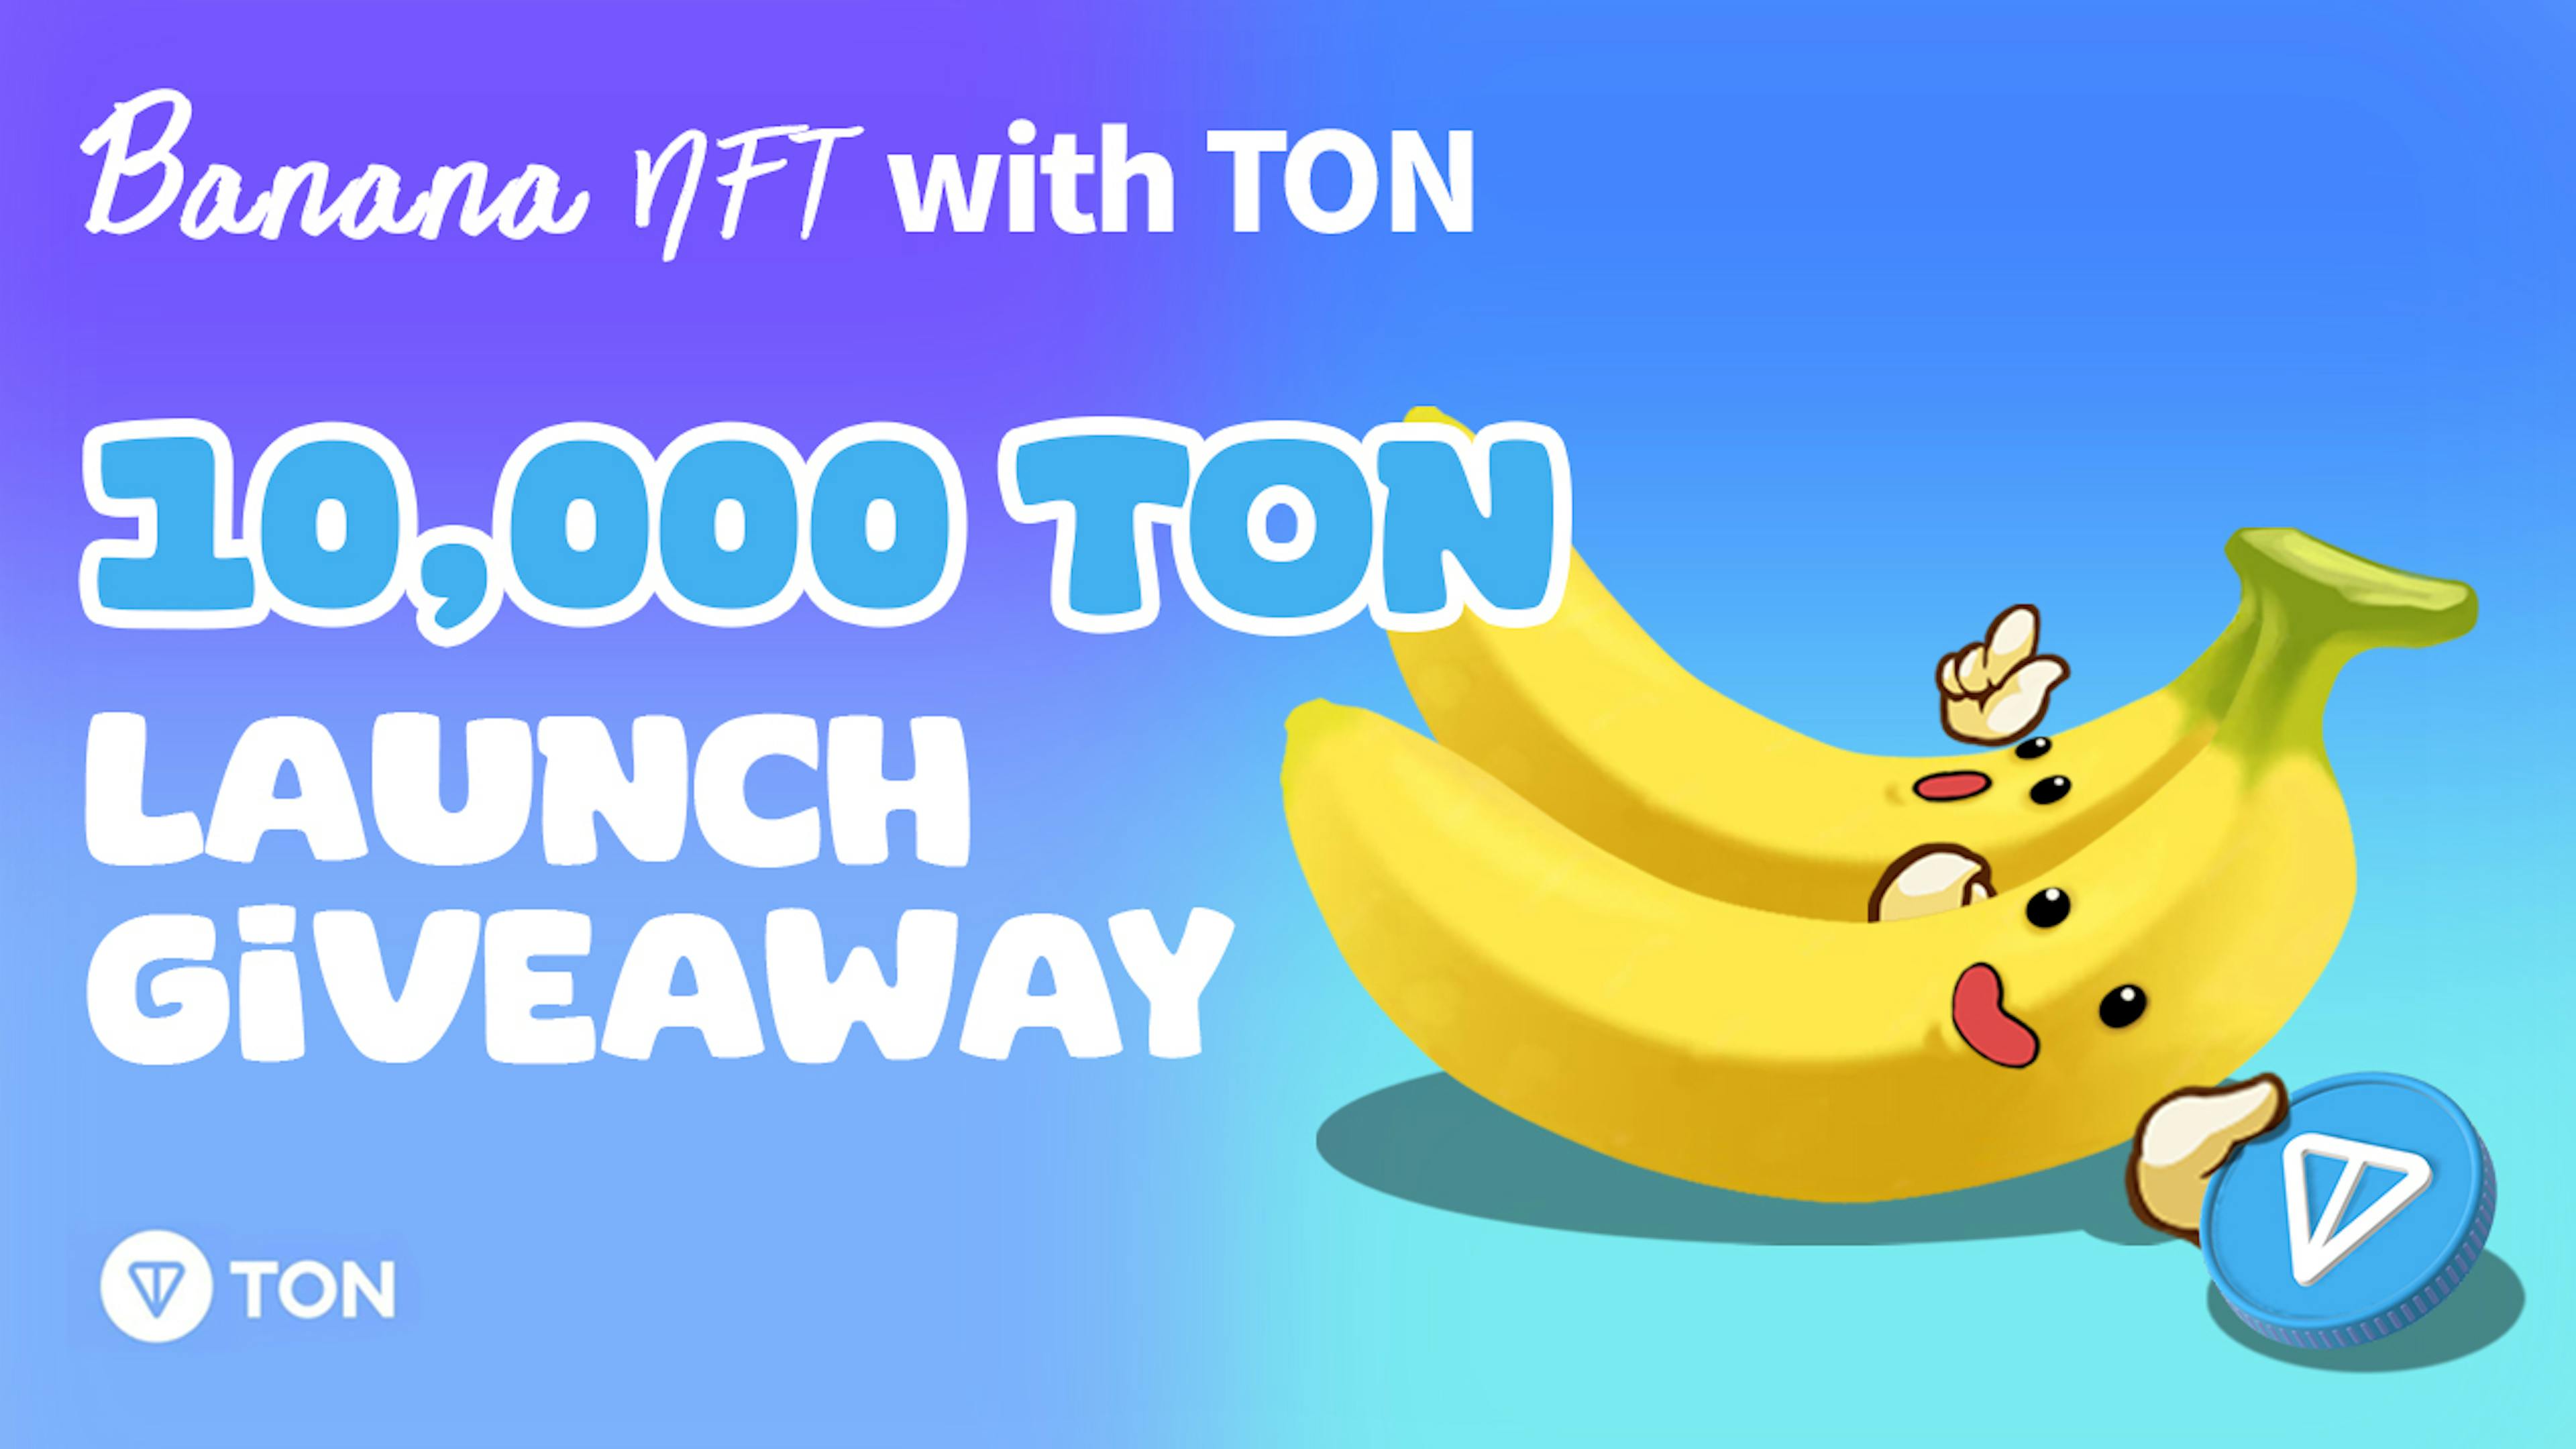 featured image - Banana NFT Launches on Telegram with 10,000 $TON Giveaway Event